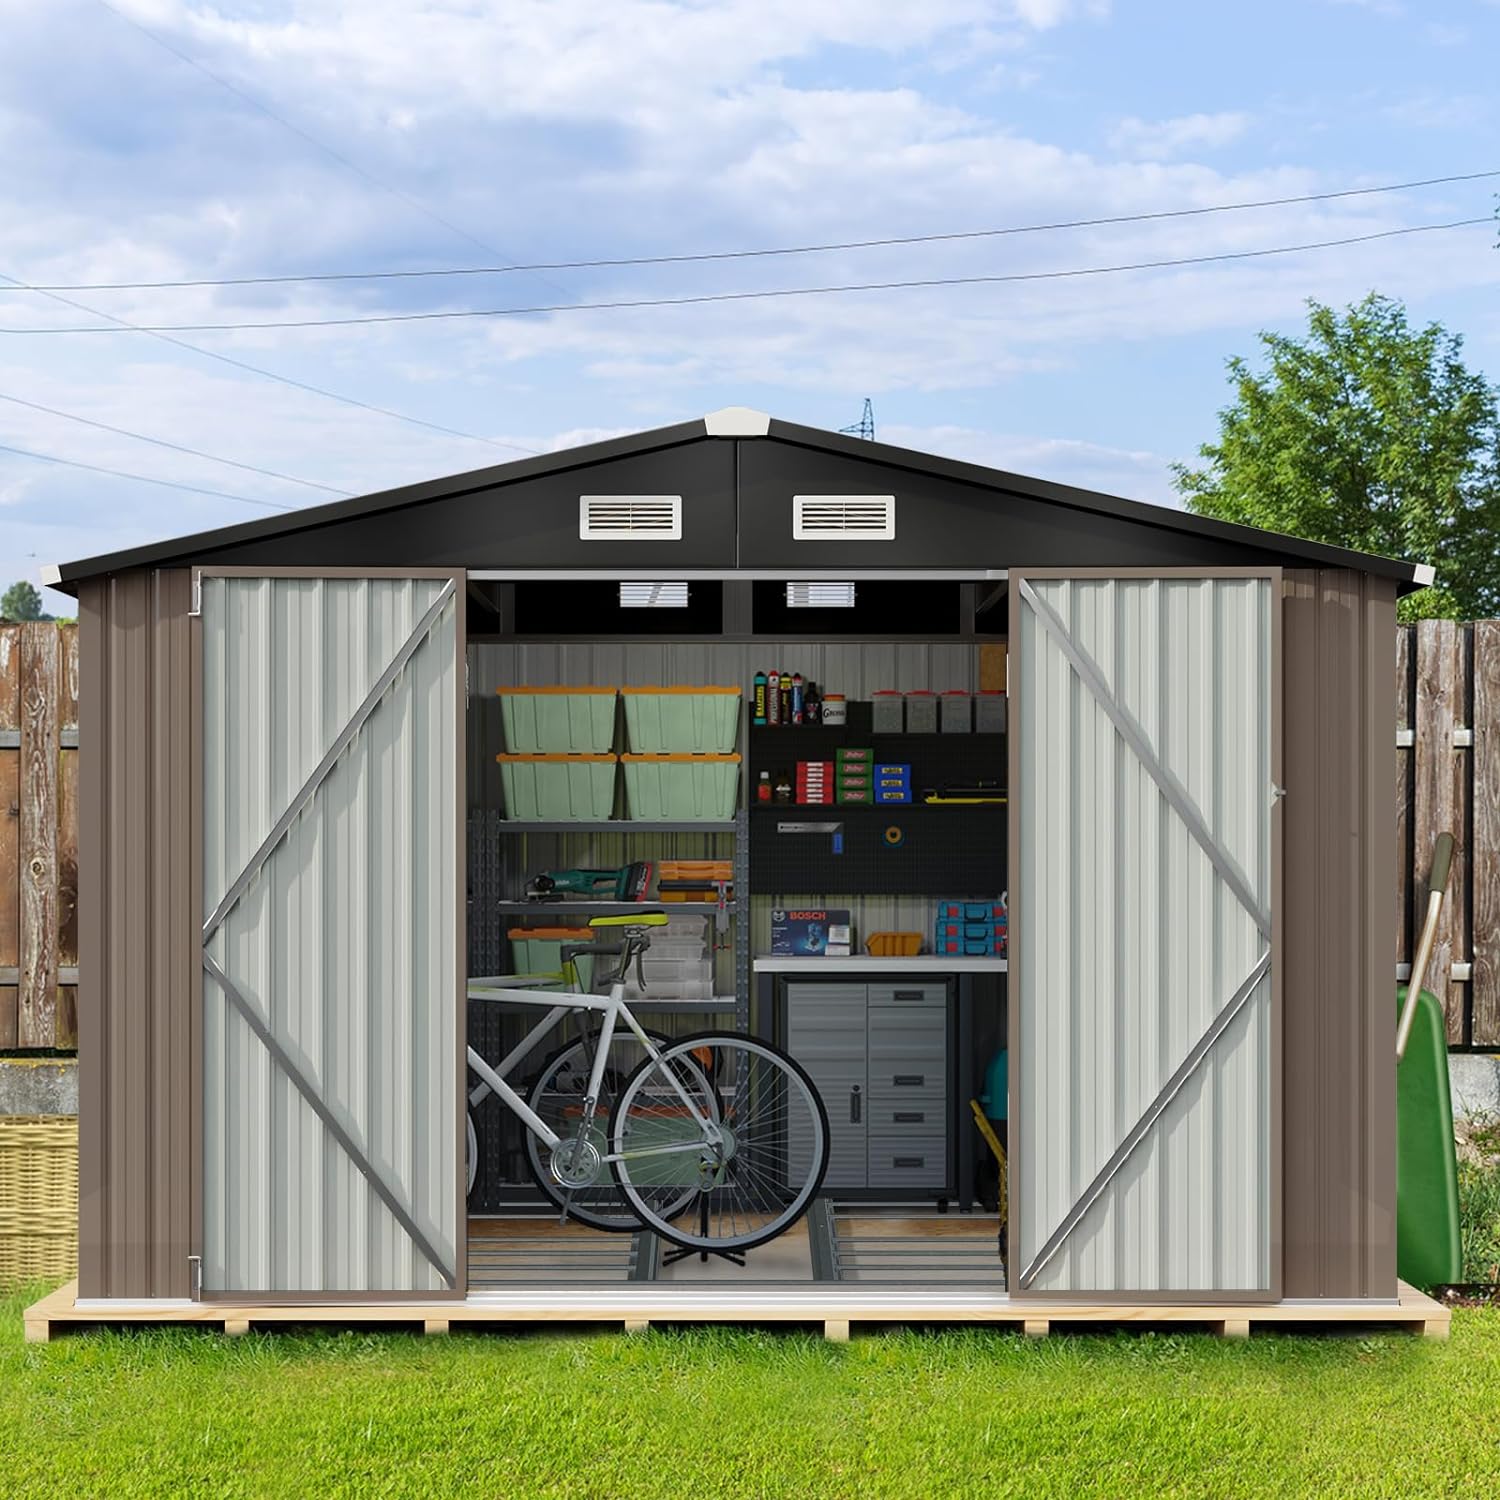 8.5 x 5.6 ft Utility Metal Shed with Base, Galvanized Steel Tool Storage Shed with Air Vent and Lockable Door